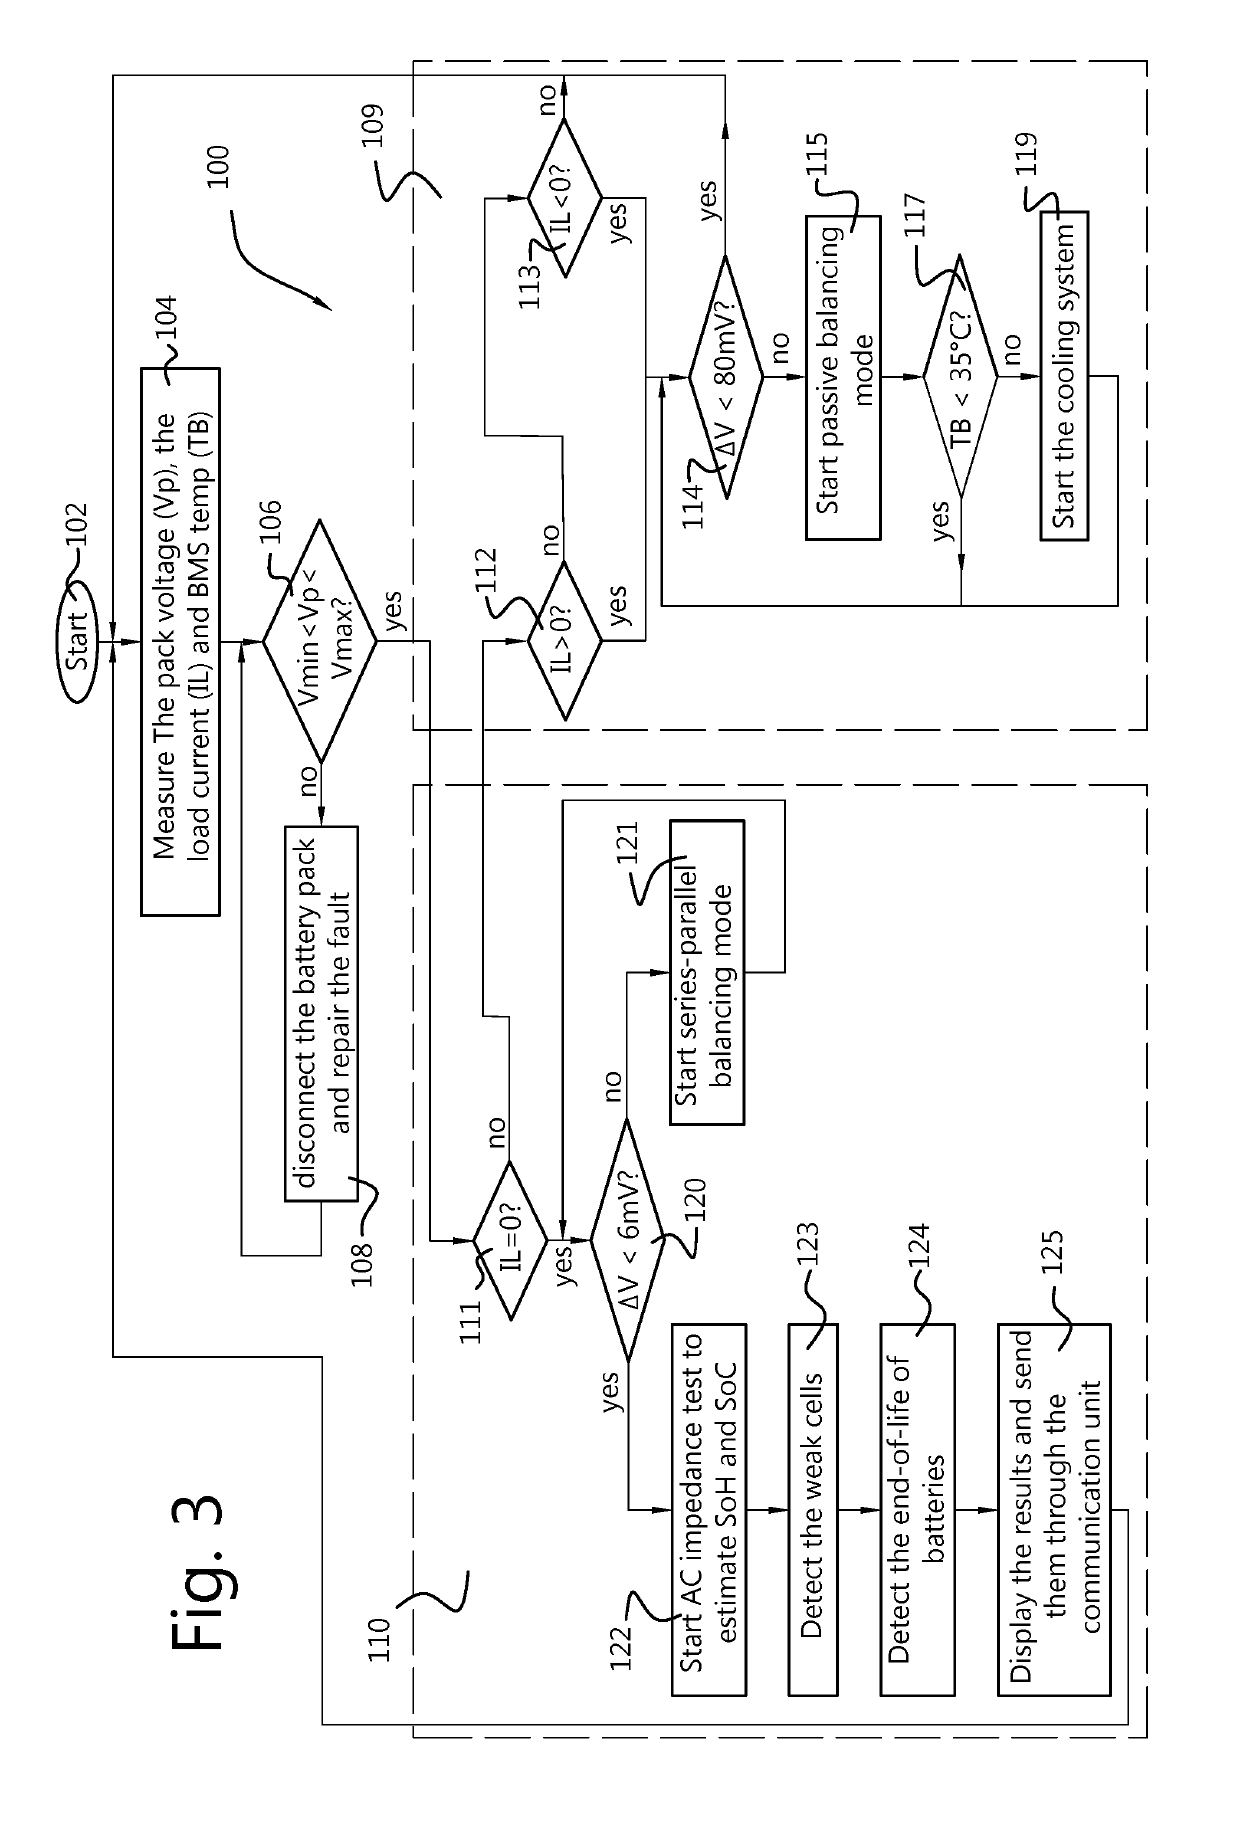 Method and apparatus of a modular management system for energy storage cells